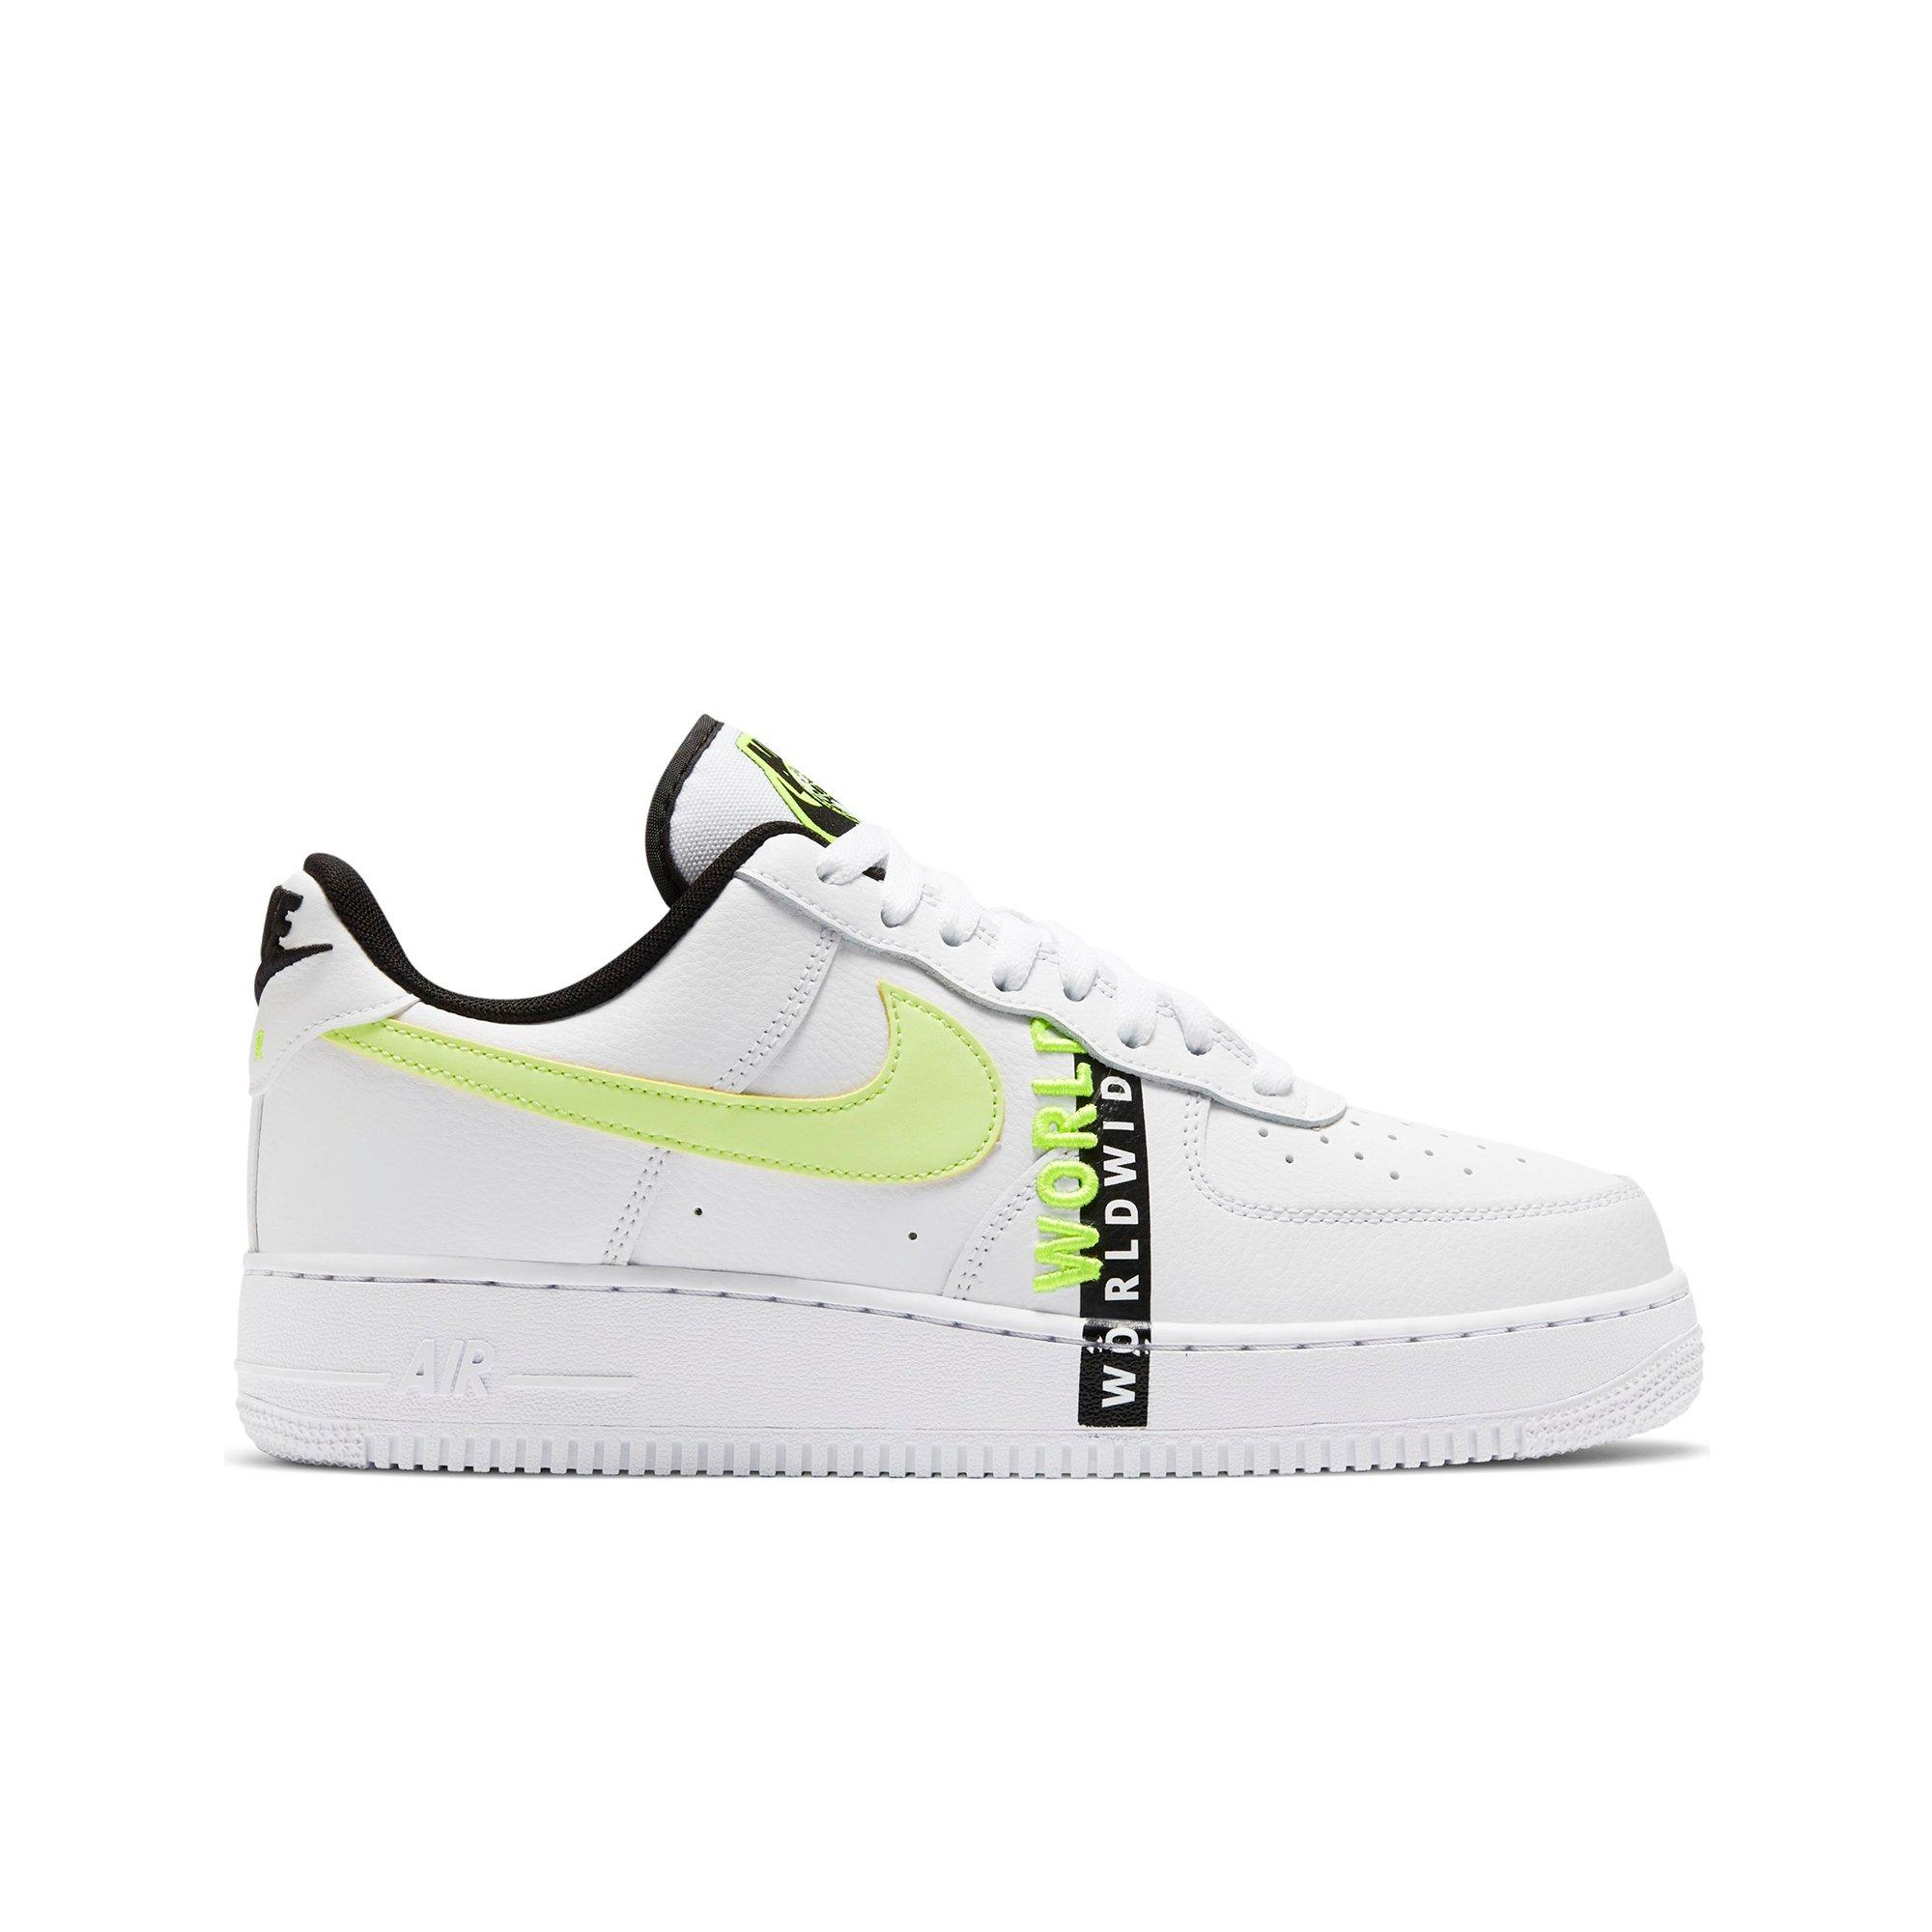 hibbets air force ones